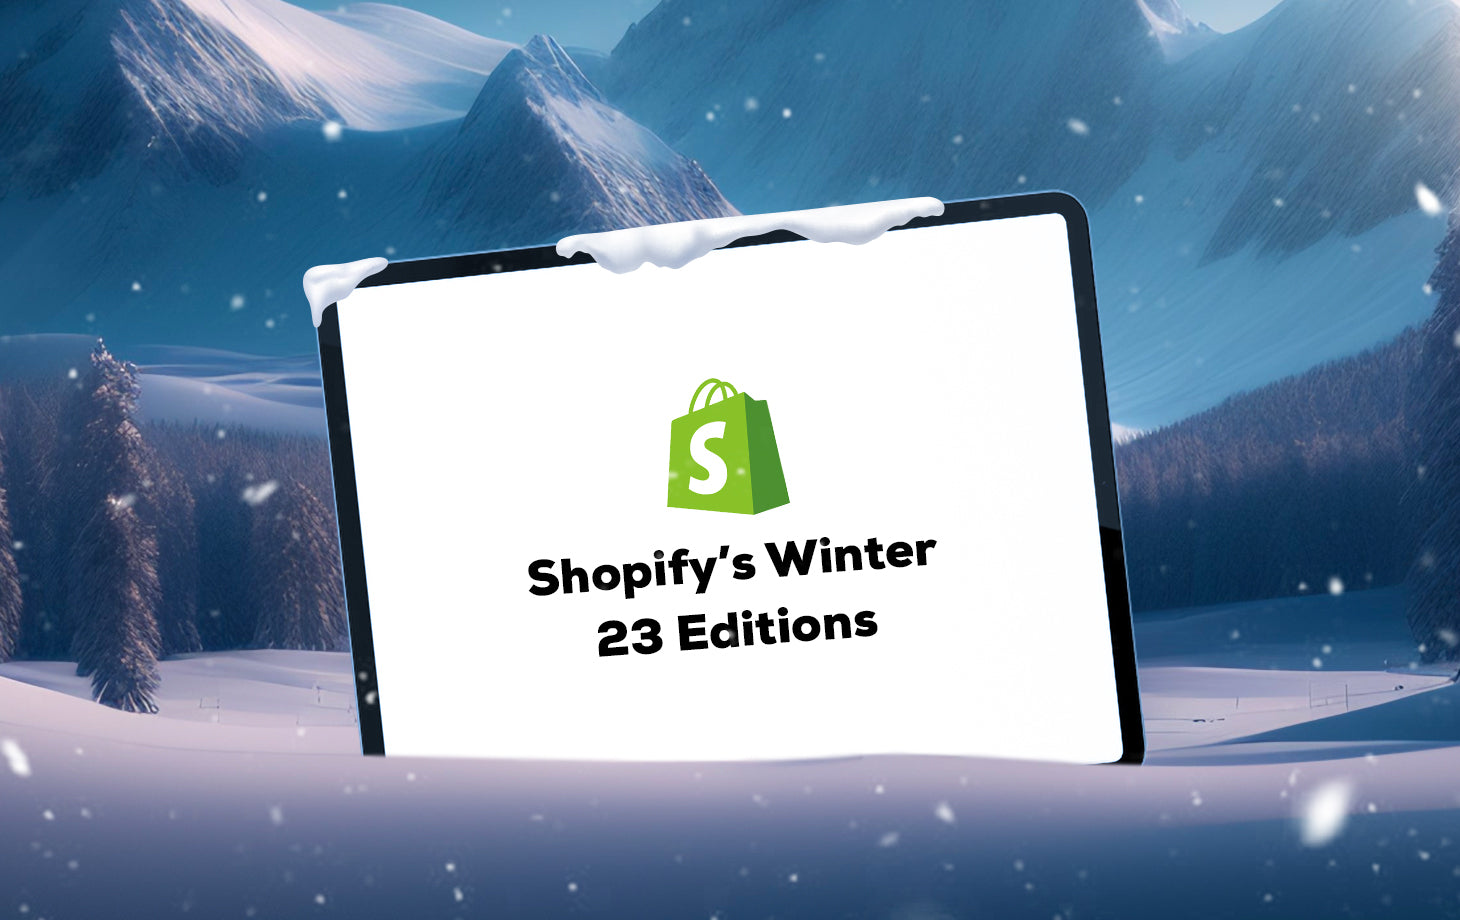 shopify winter 23 editions: all you should know